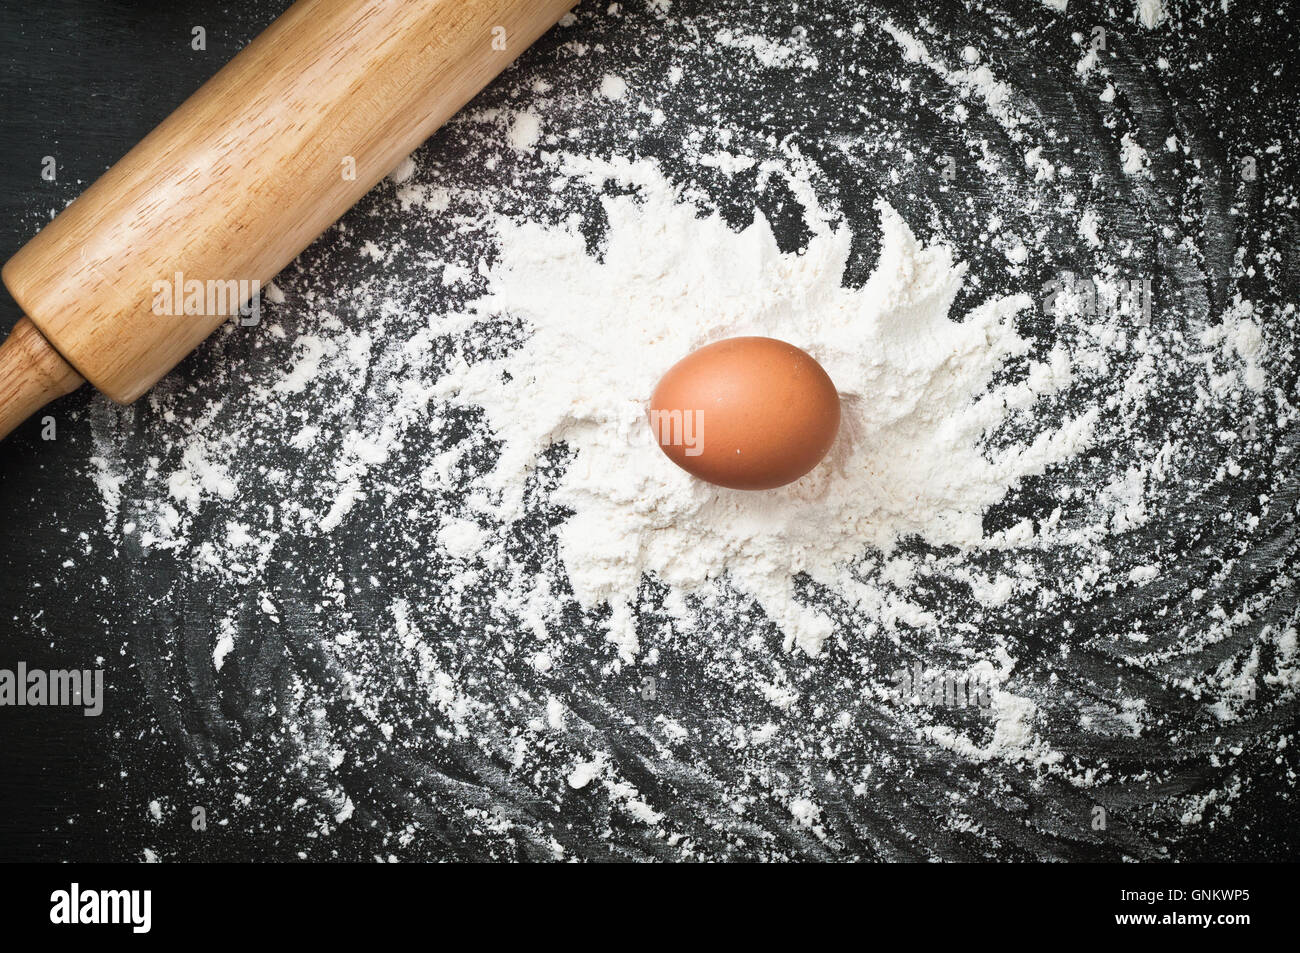 Galaxy on the Kitchen. Spiral of galaxy spelled by wheat flour and brown chicken egg on chalkboard Stock Photo